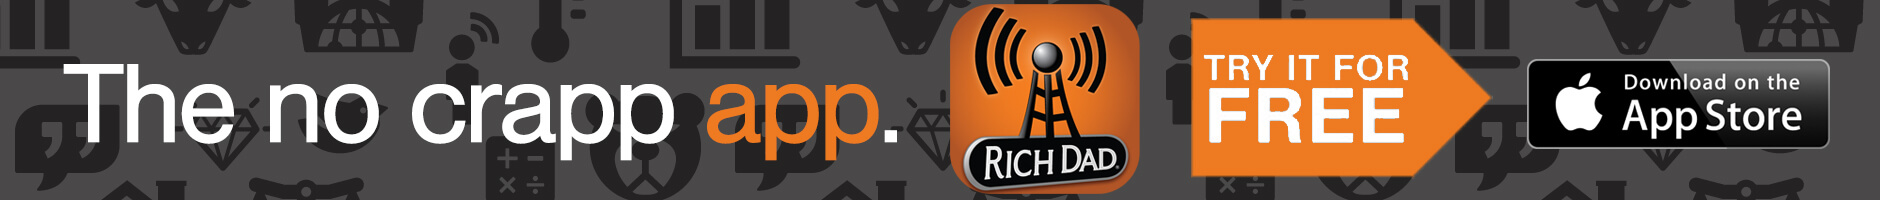 Rich Dad Radio Show App - Try it for FREE